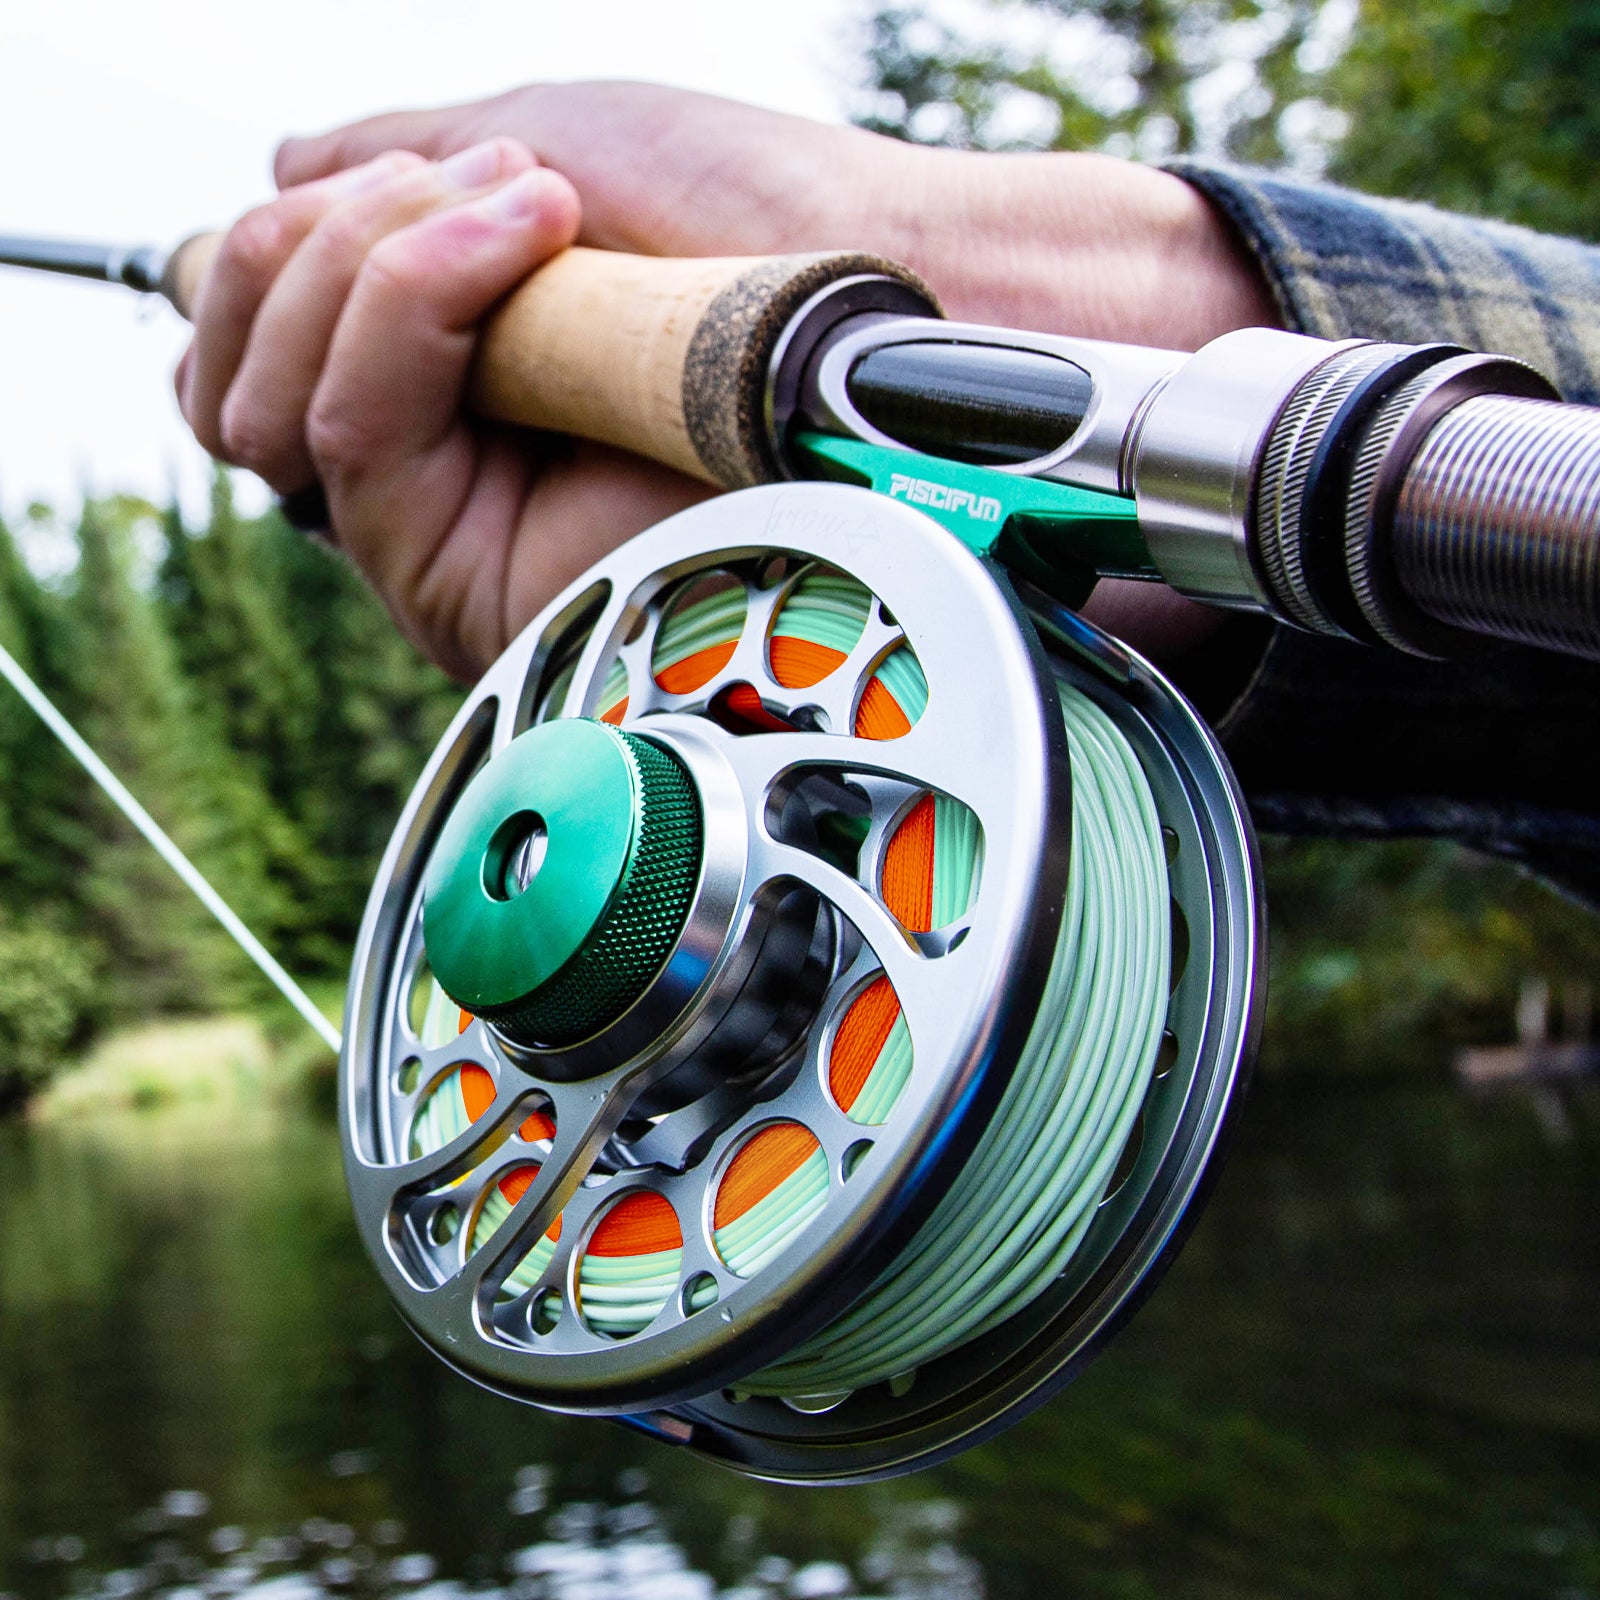 Piscifun Sword Fly Reel with CNC-machined Aluminium Material Space